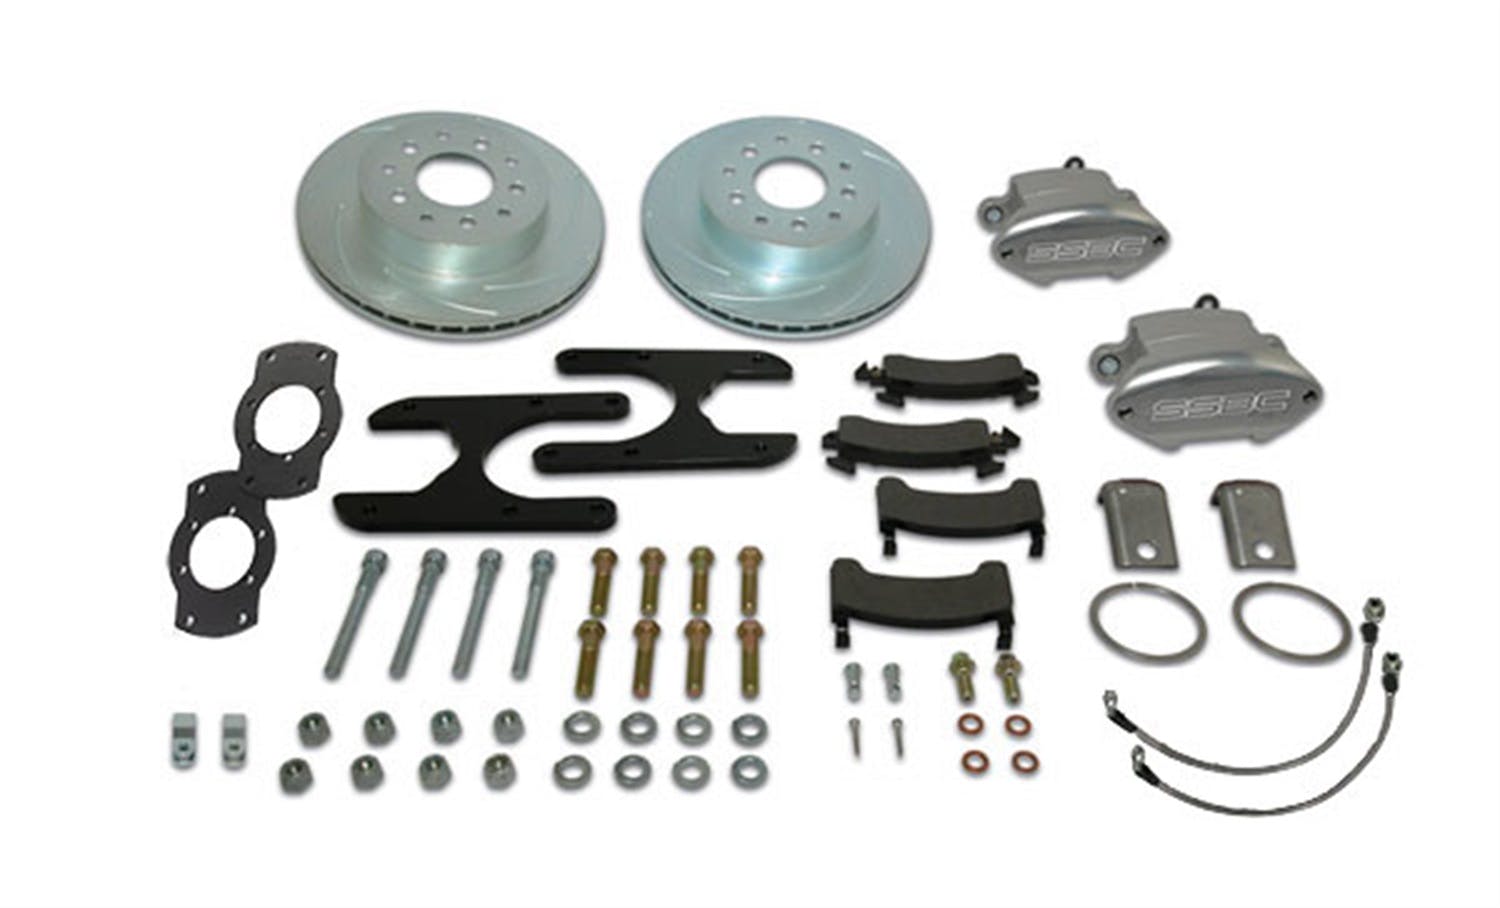 Stainless Steel Brakes A111-20BK Kit A111-20 w/black calipers